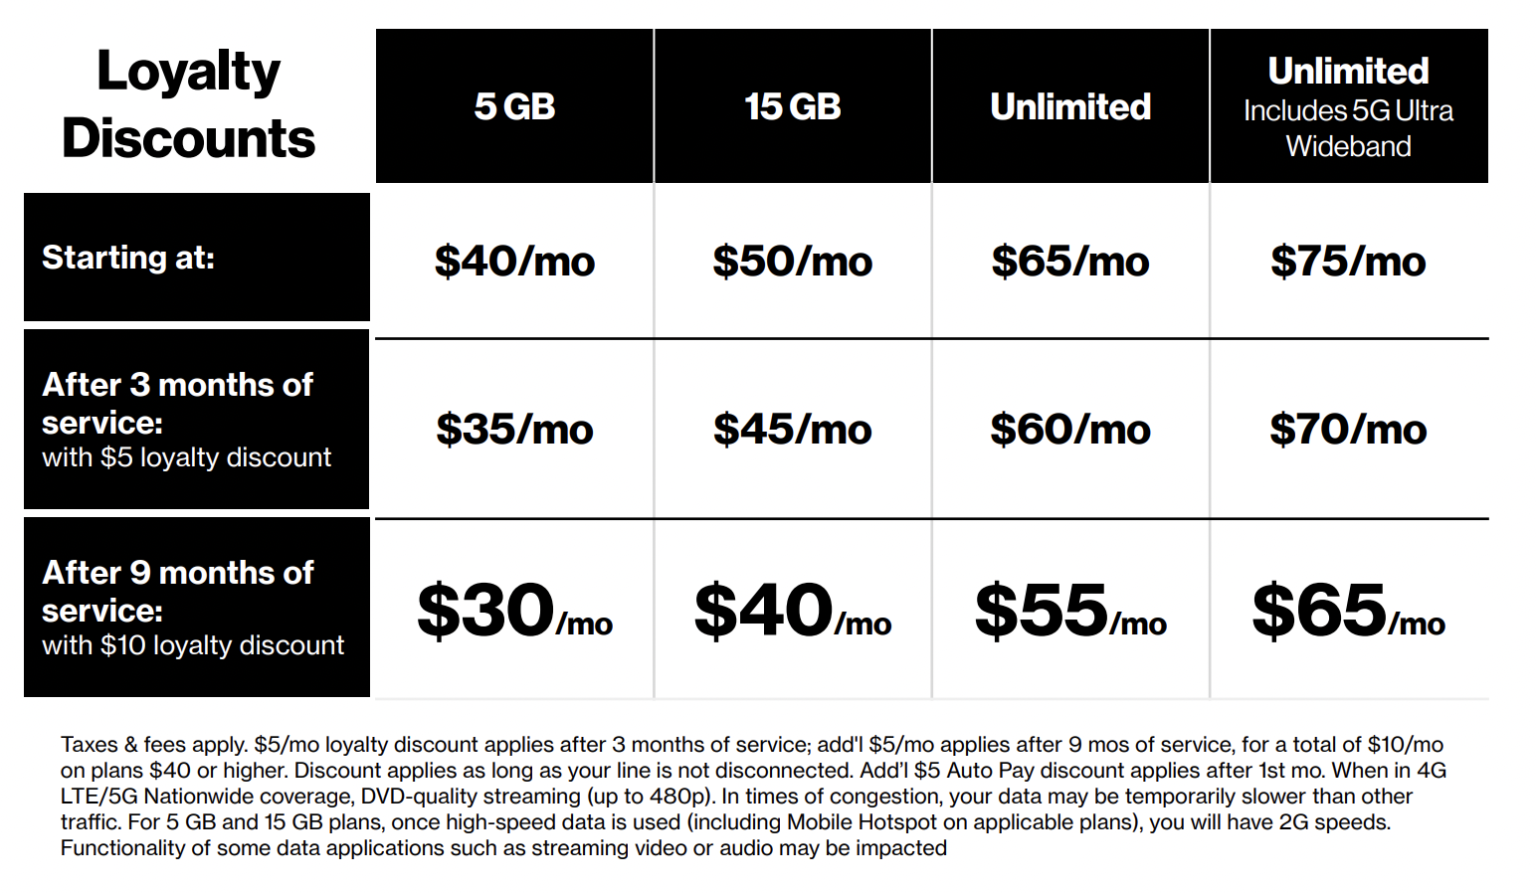 Verizon Prepaid Adds 5G Ultra Wideband Unlimited Smartphone Plan for